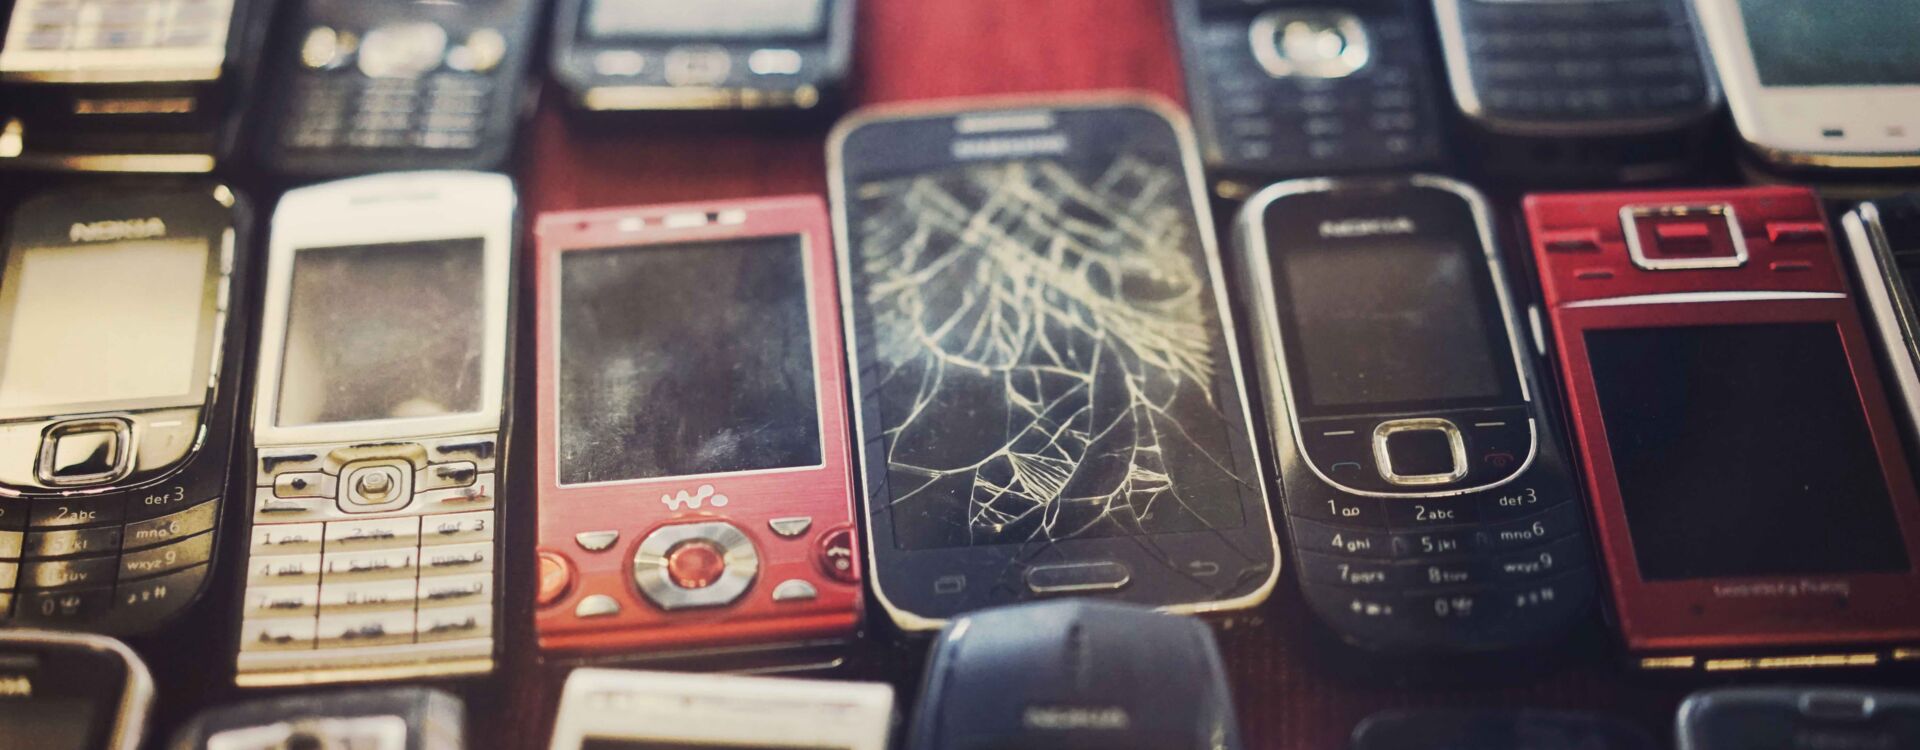 Many old and broken cell phones